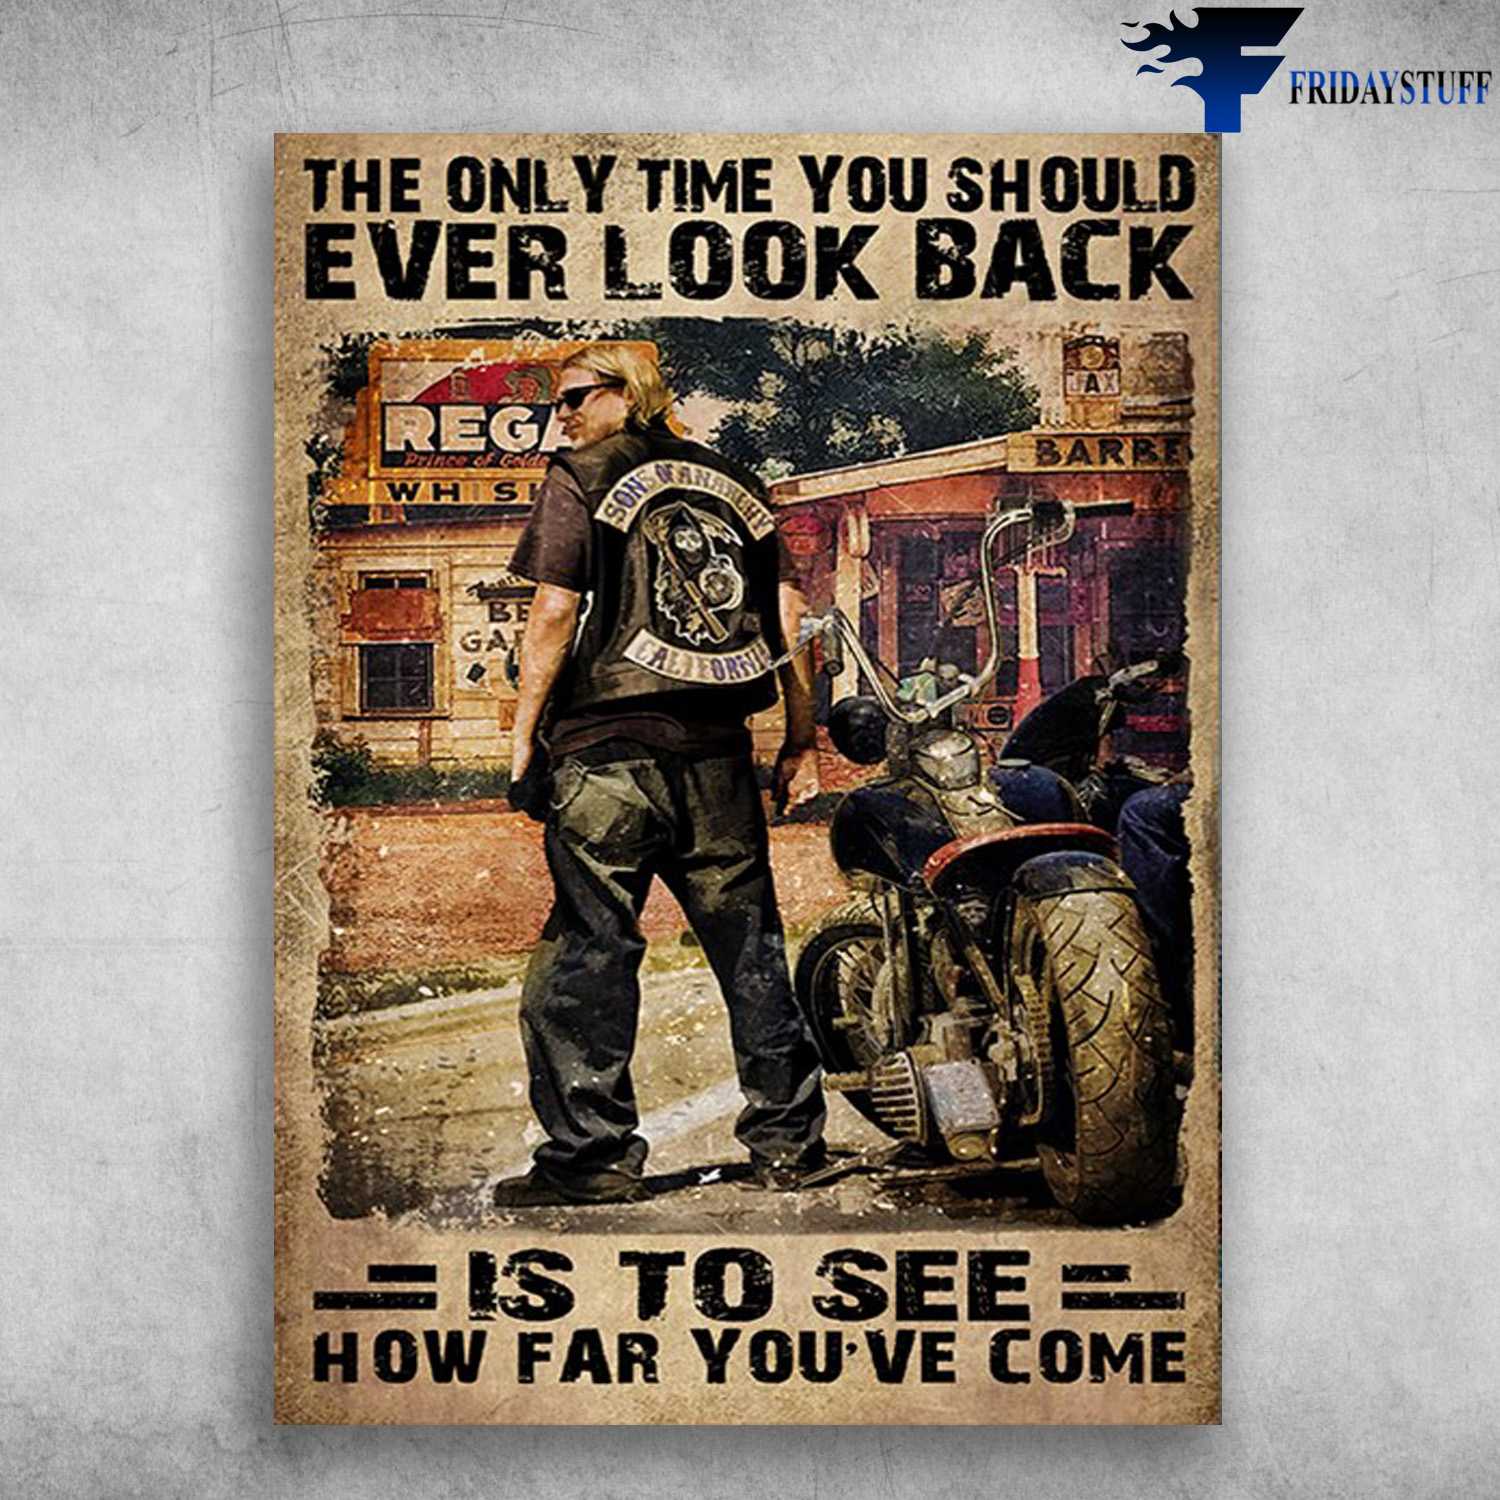 Motorcycle Man, Biker Lover - The Only Time You Should Ever Look Back, Is To See How Far You've Come